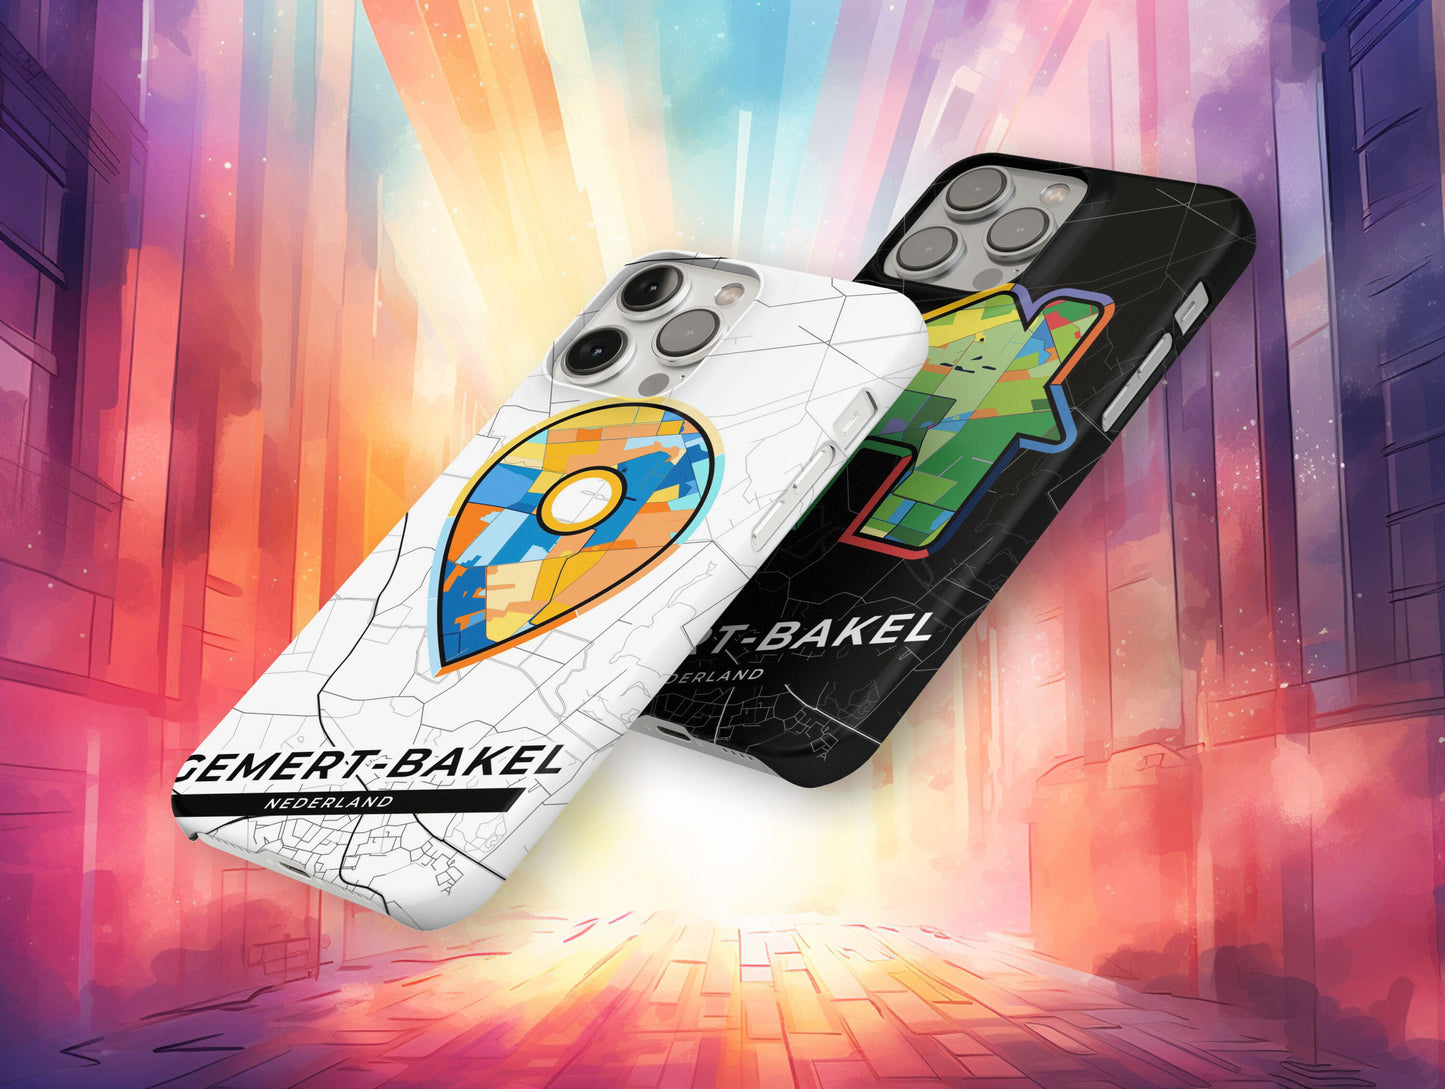 Gemert-Bakel Netherlands slim phone case with colorful icon. Birthday, wedding or housewarming gift. Couple match cases.